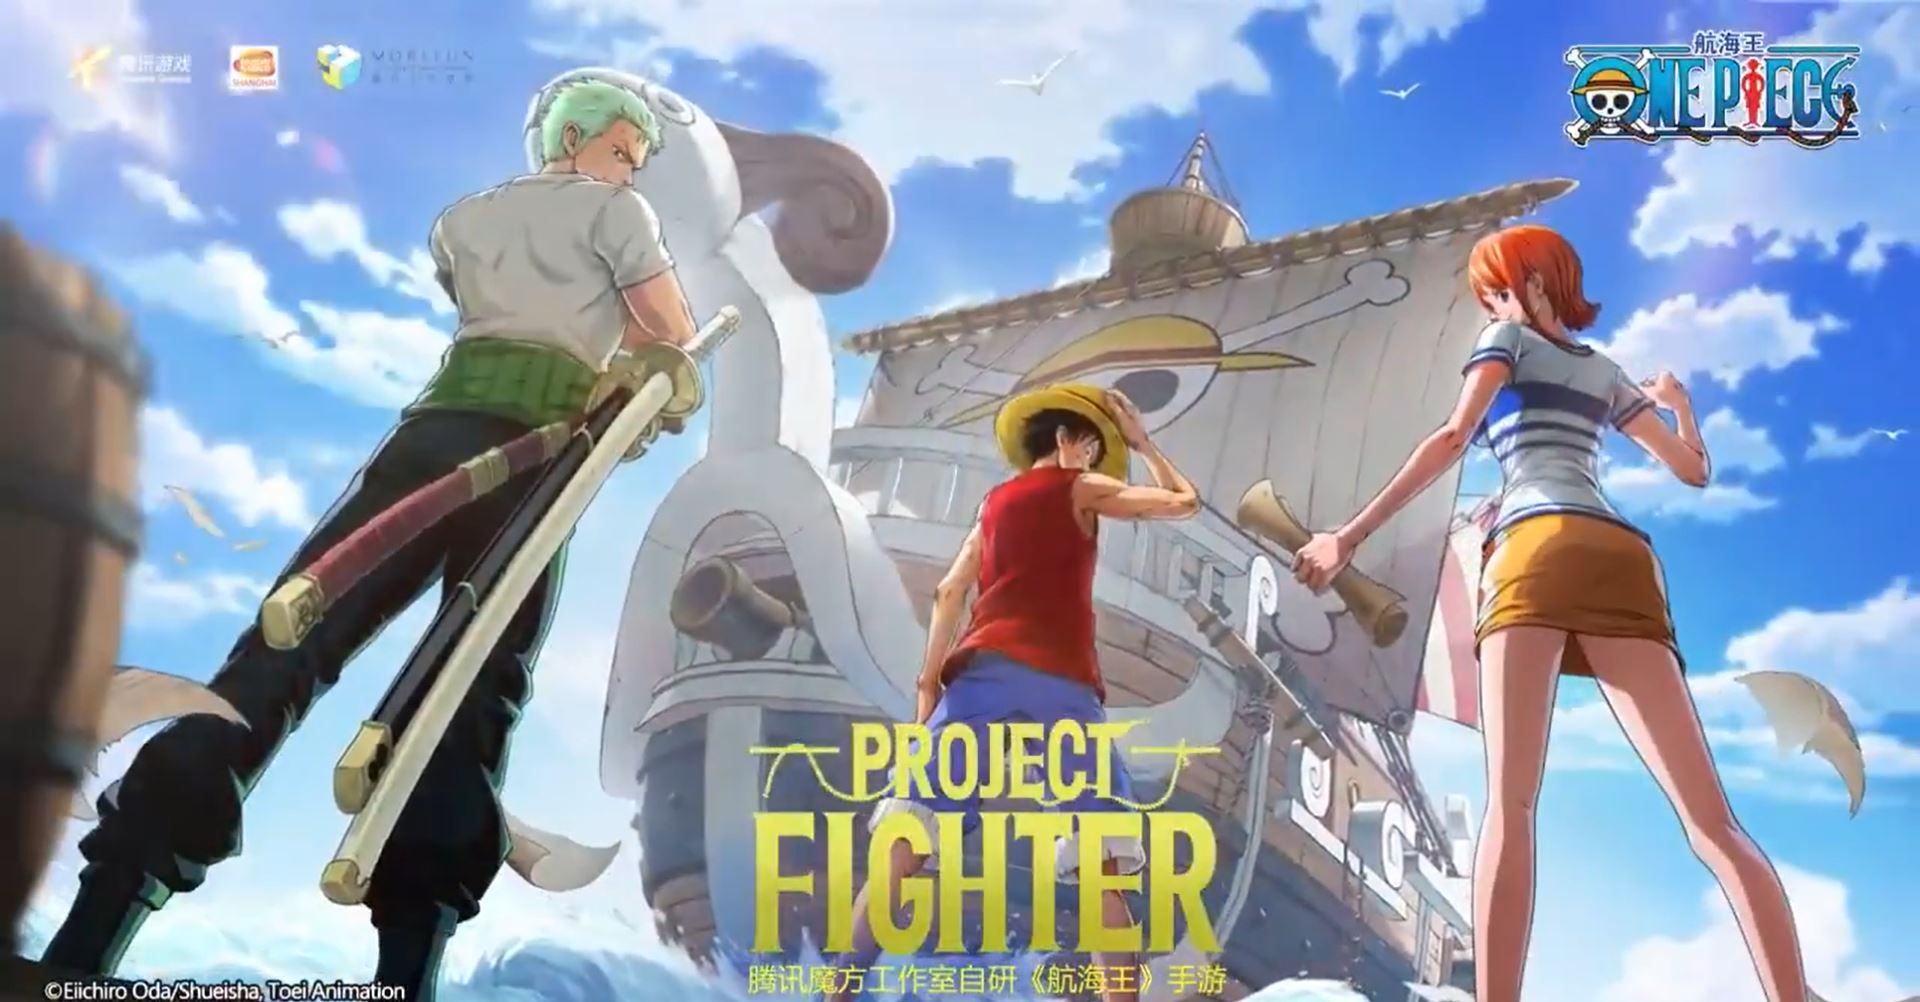 One Piece Mobile Game Announced By Tencent Here's The First Look